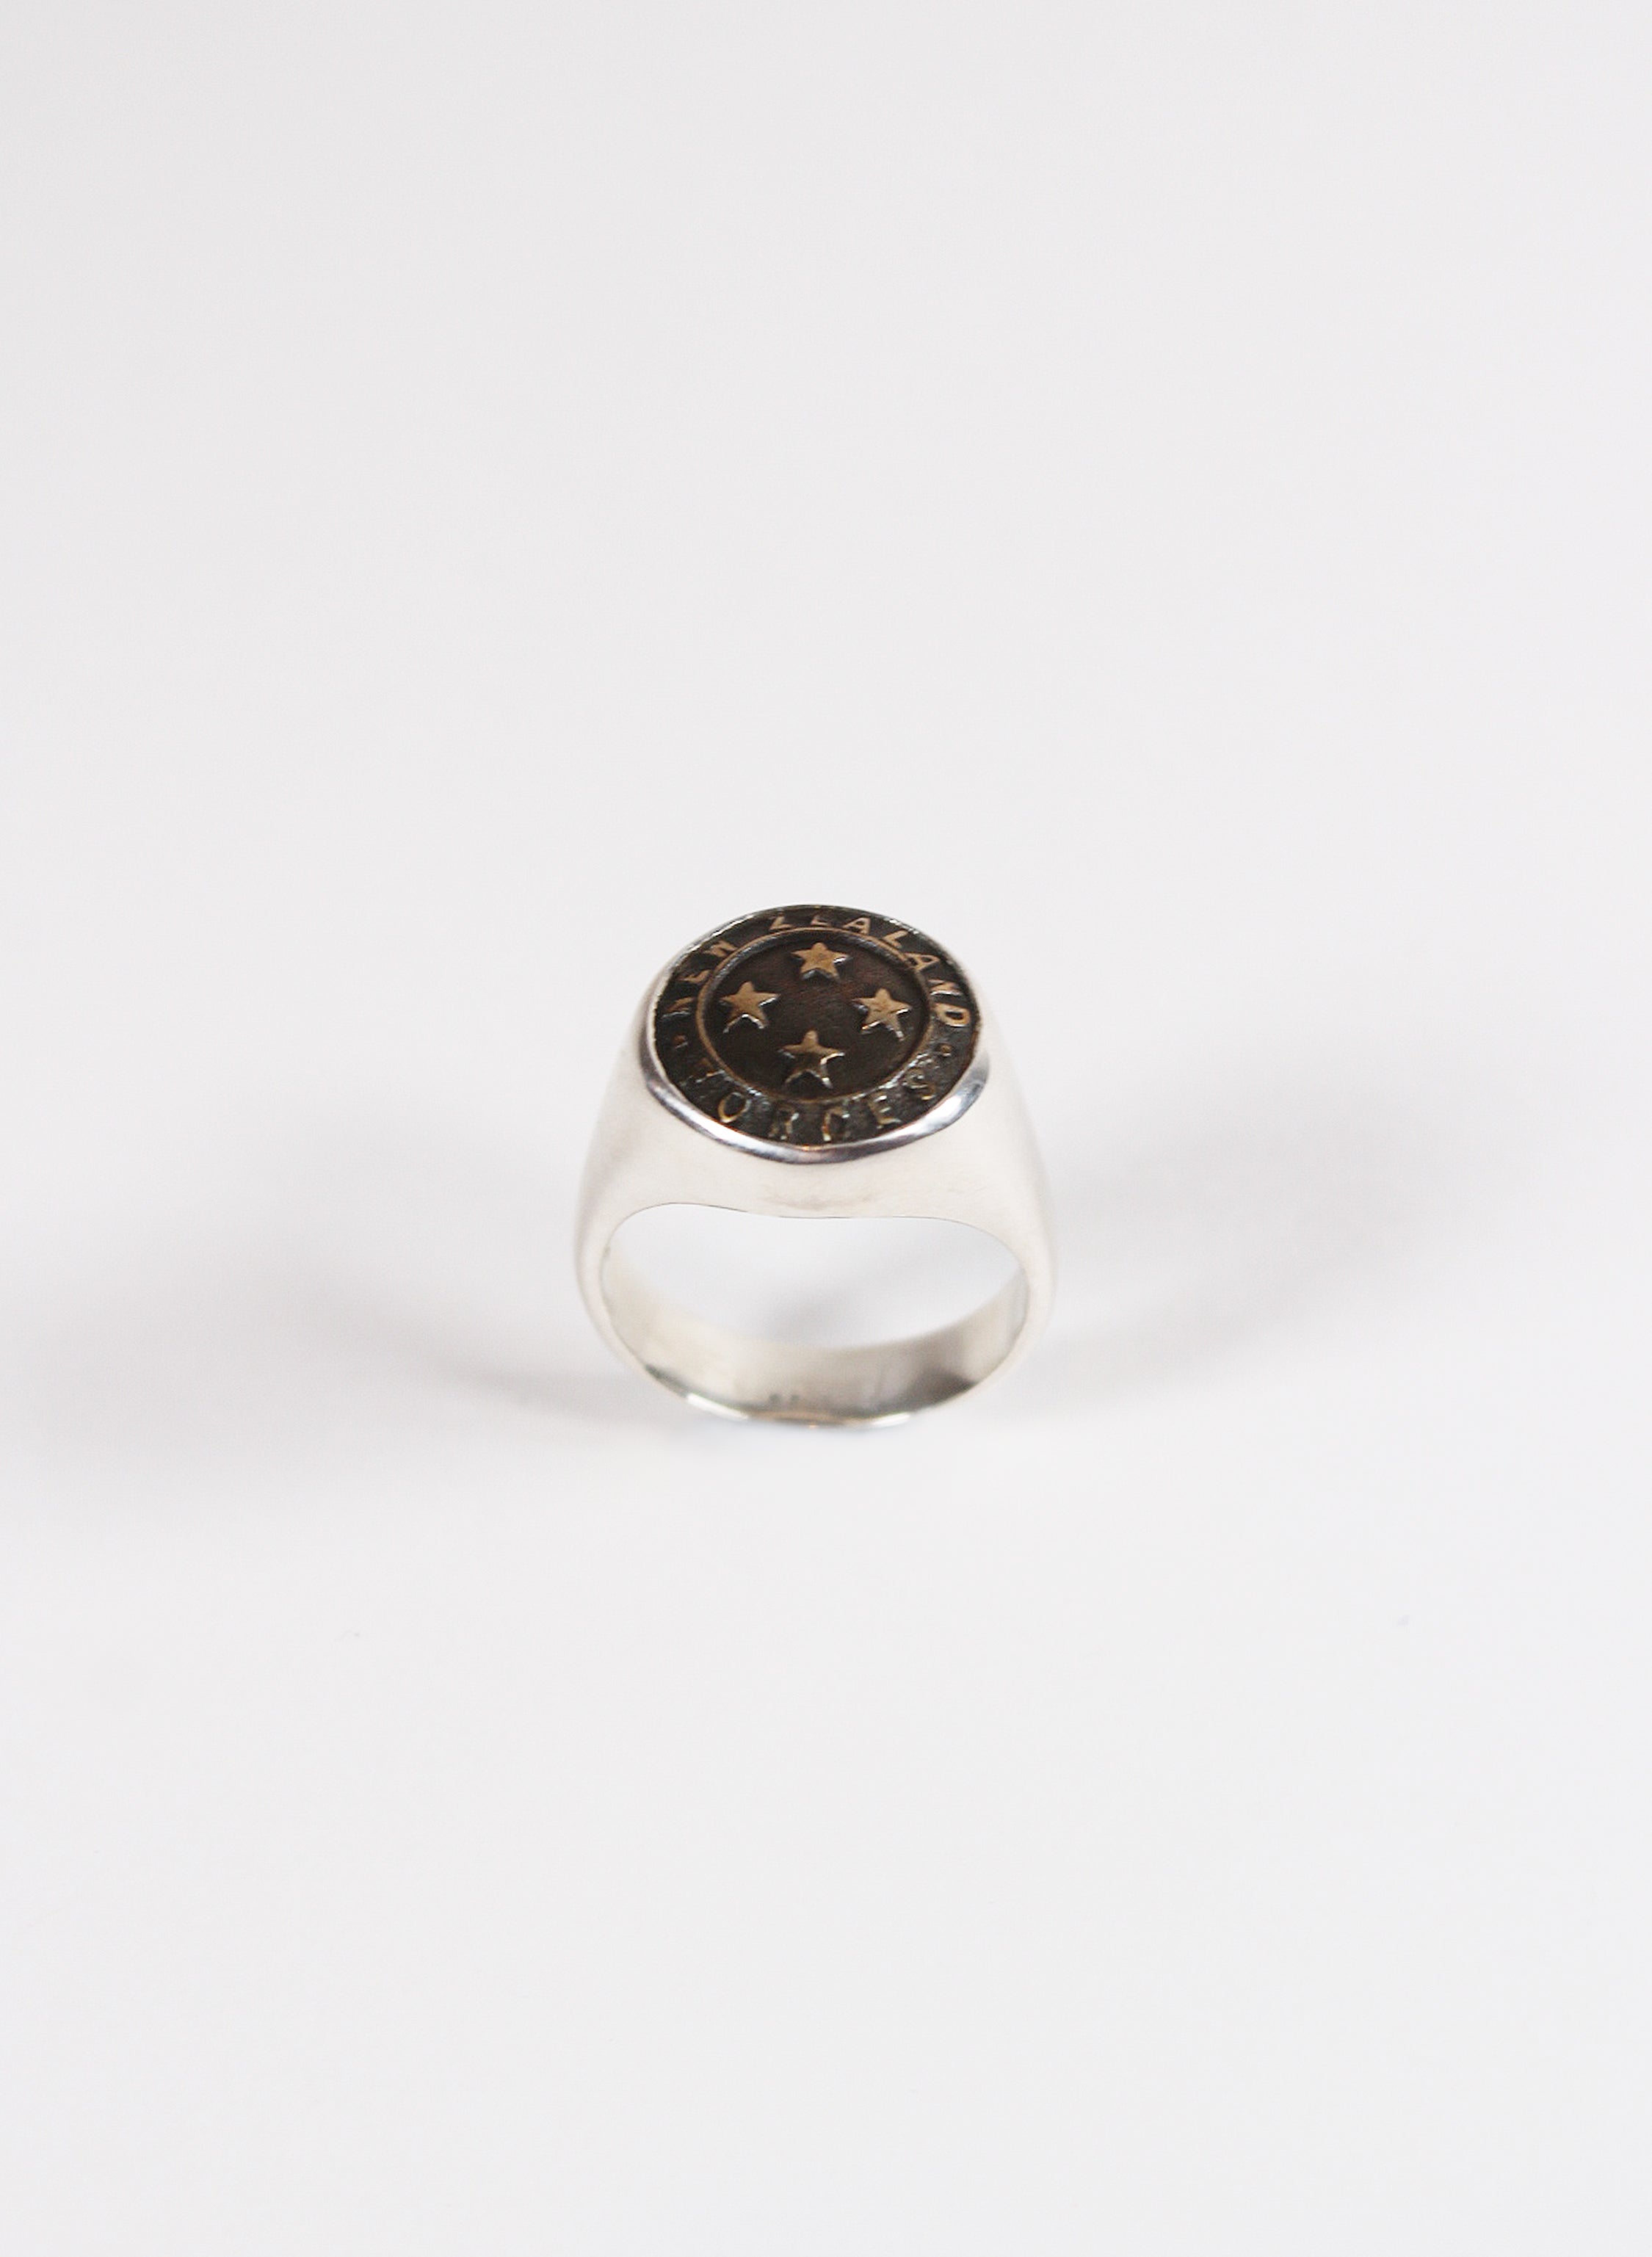 NZ Forces Signet Ring - Bronze &amp; Sterling Silver Ring